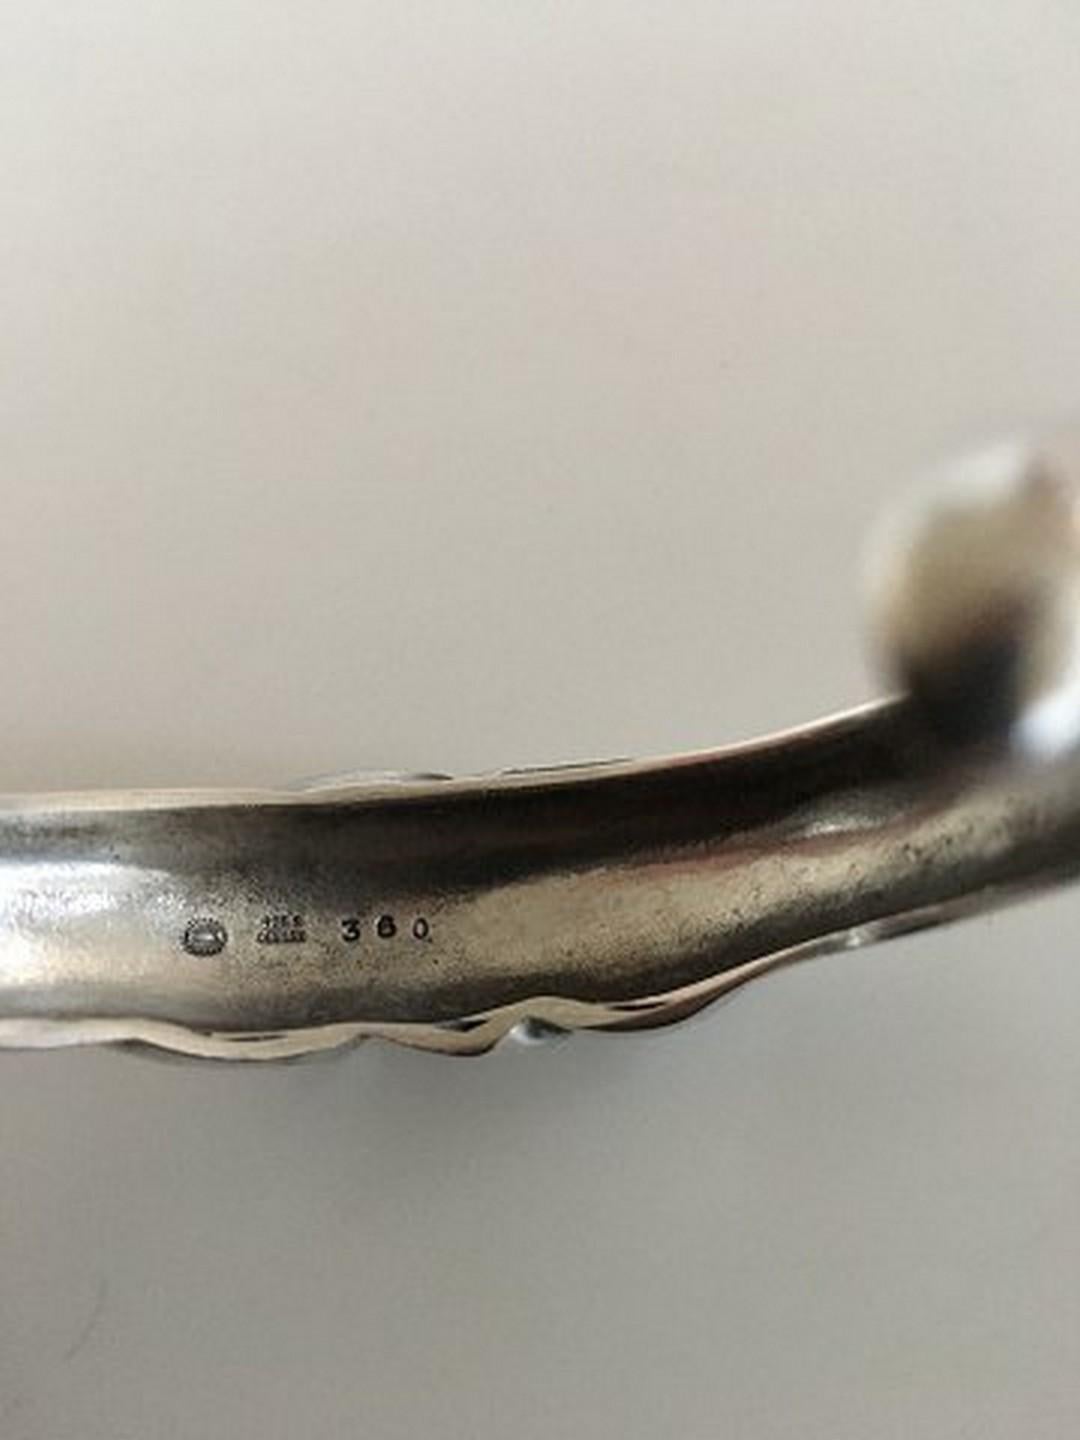 Georg Jensen Sterling Silver Ole Kortzau Cuff/ Armring No. 360 with Moonstone. Measures 1.6 cm at its widest point. 5.4 cm inner diameter (2 1/8